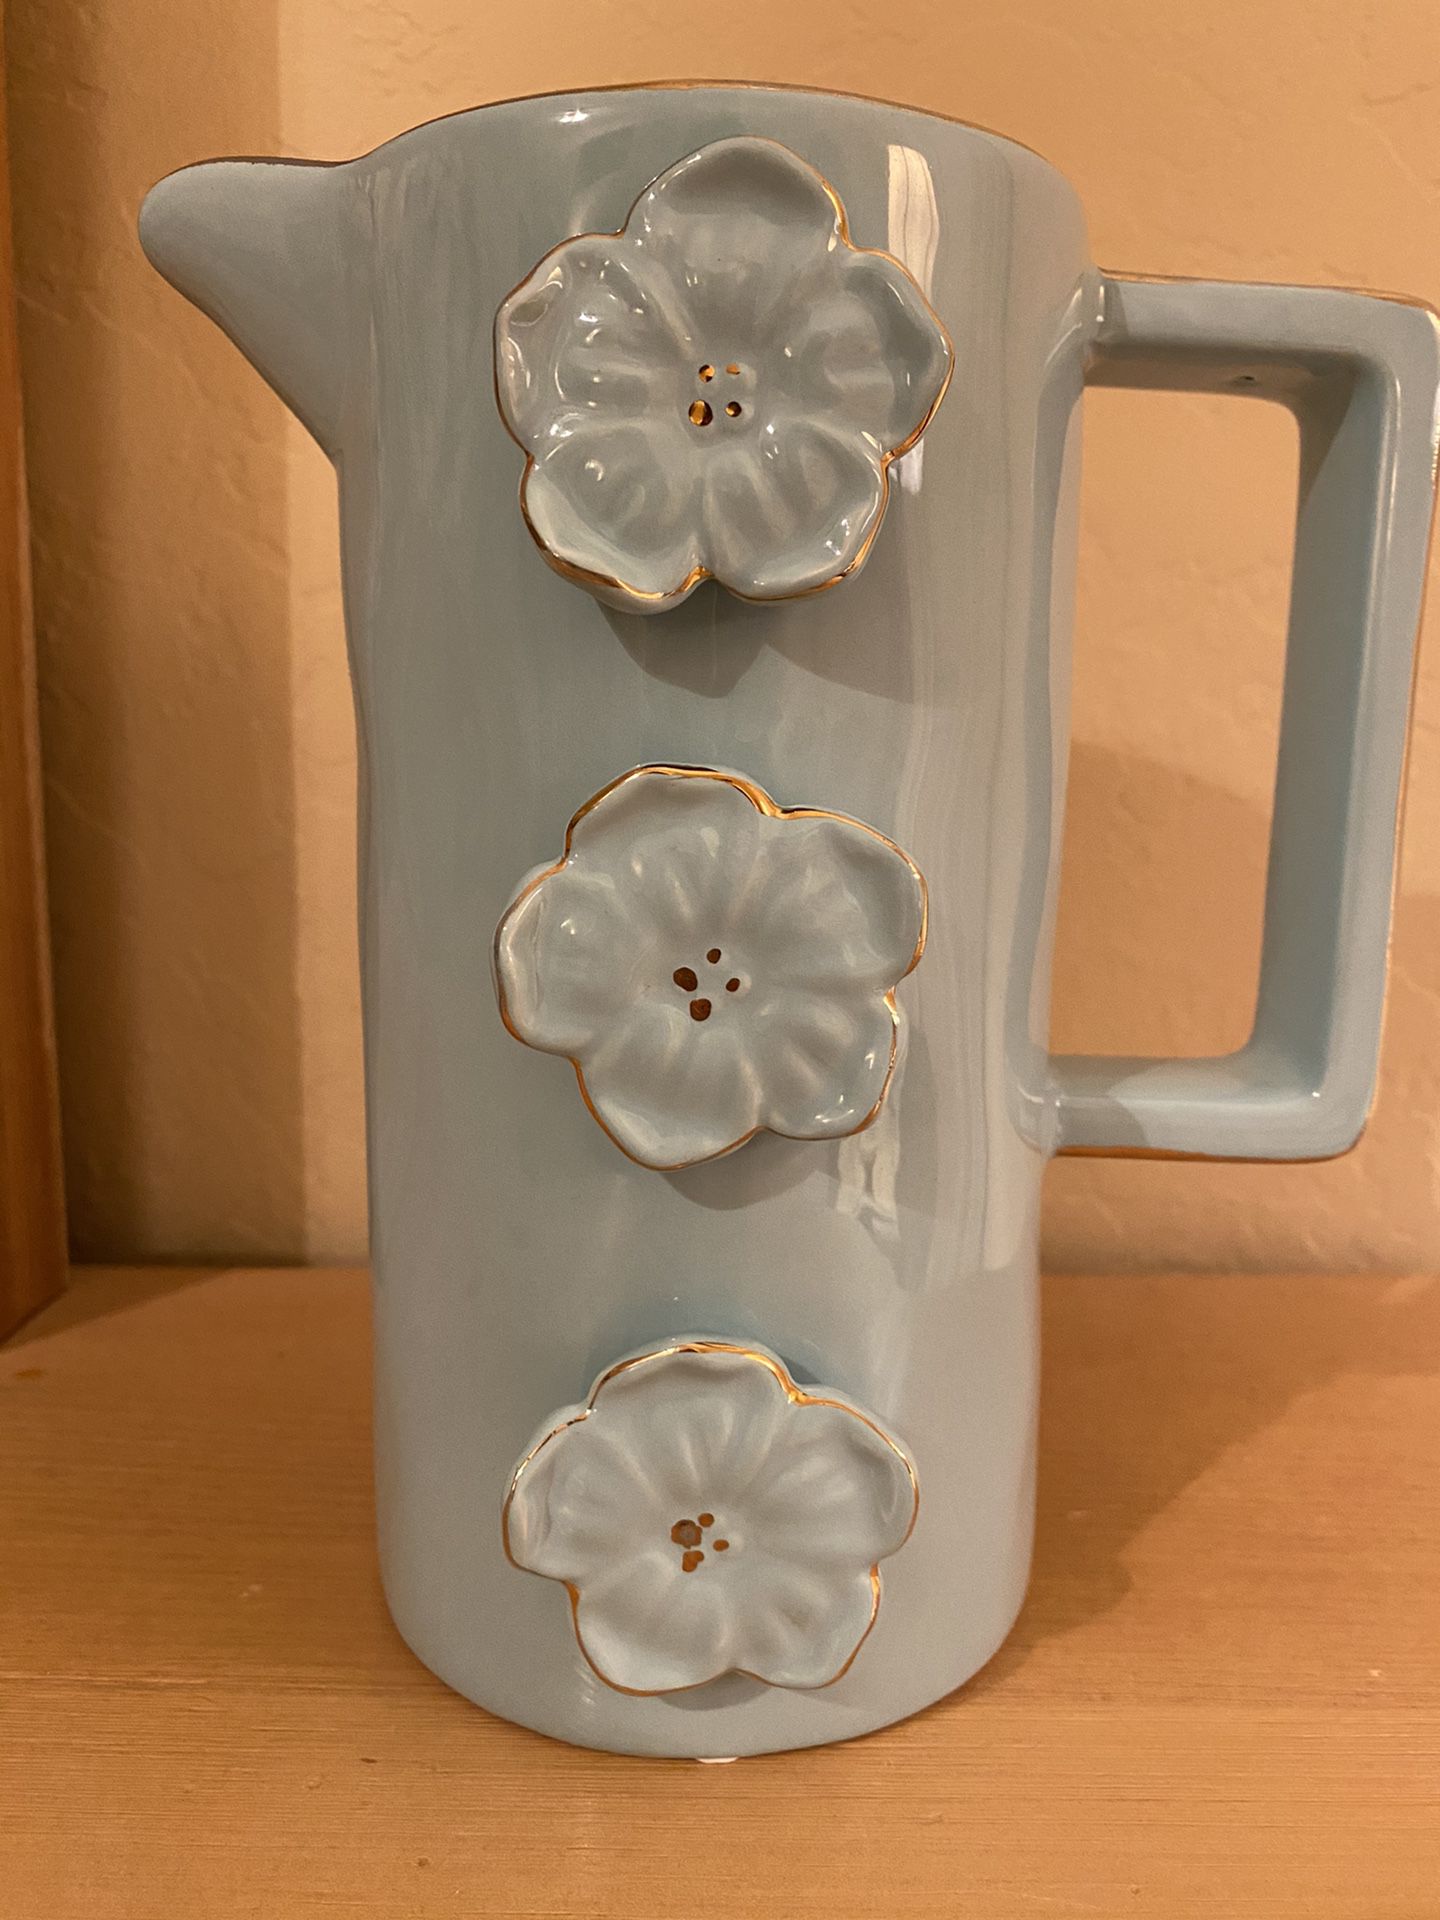 Gorgeous light blue vintage ceramic vase / pitcher. 8 x 6 inches. Raised flowers with gold edges.